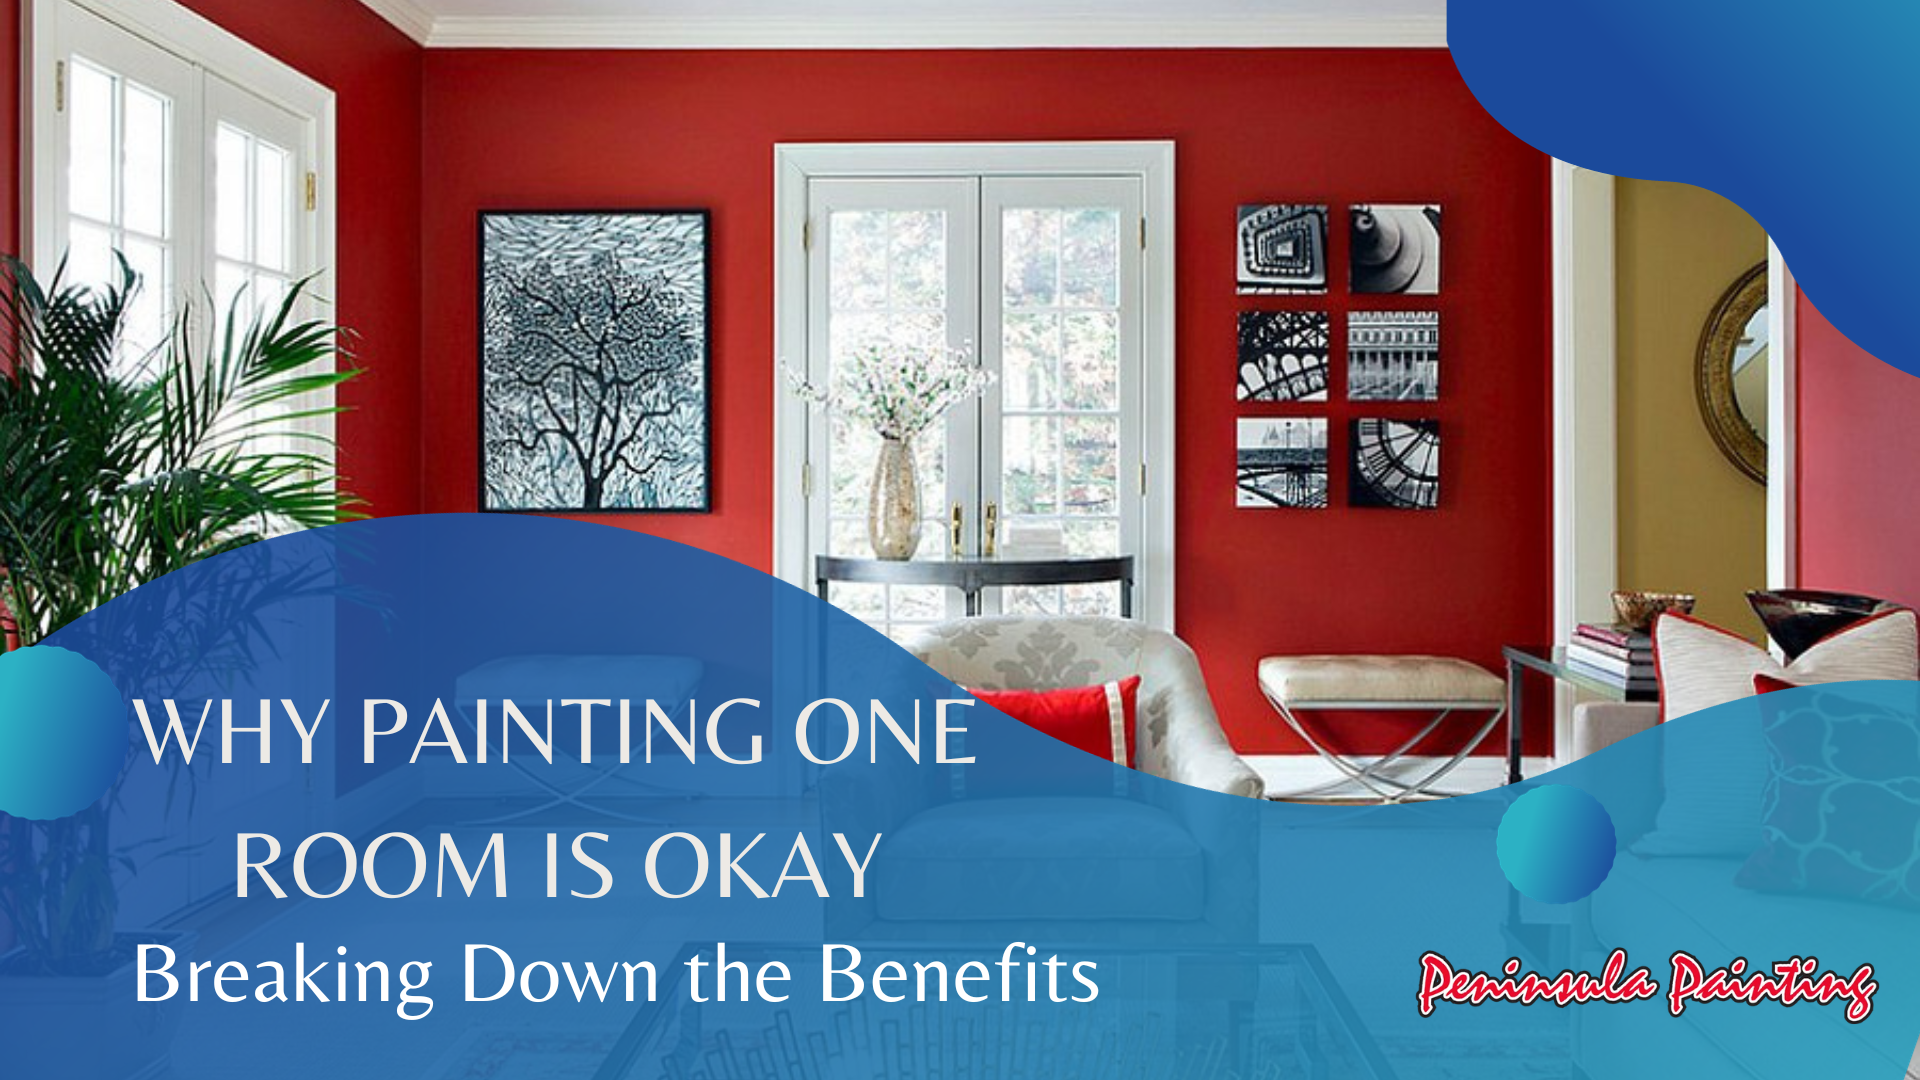 Painting one room